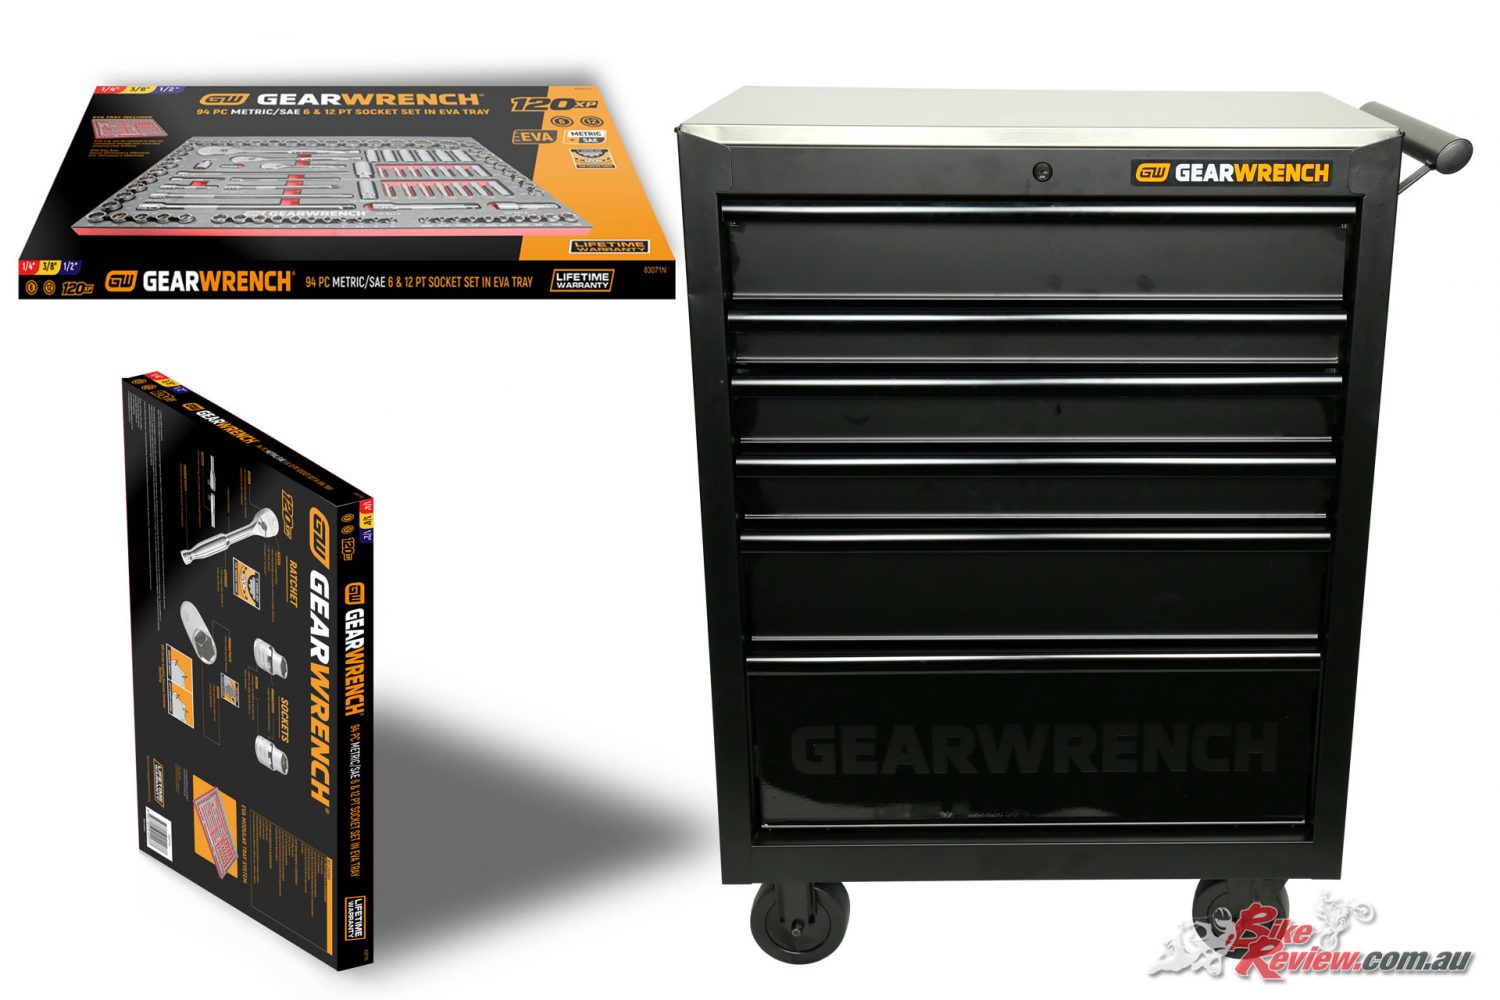 Gearwrench announce new tool range